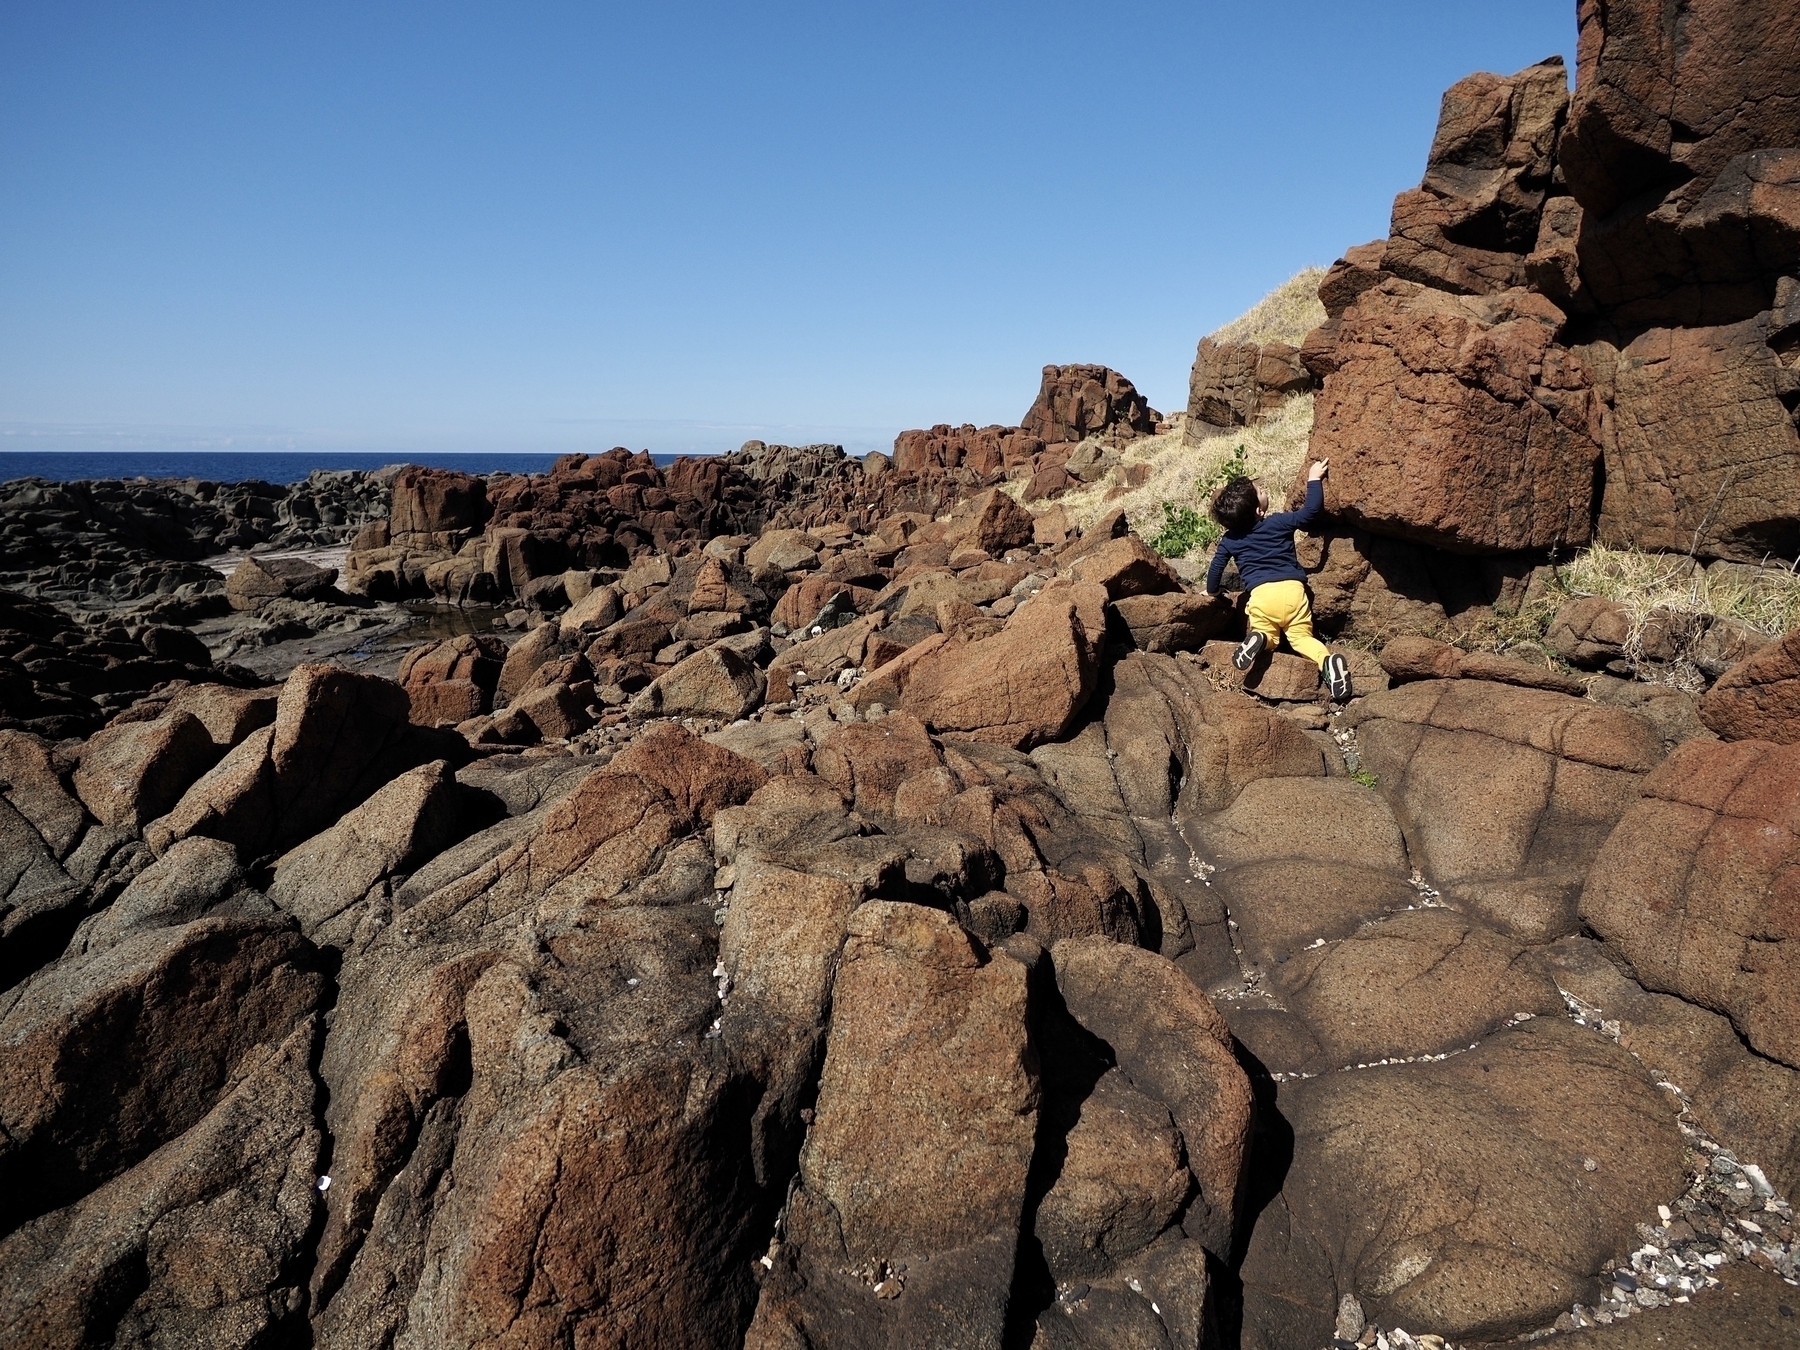 A toddler explores a rocky hill by the sea.